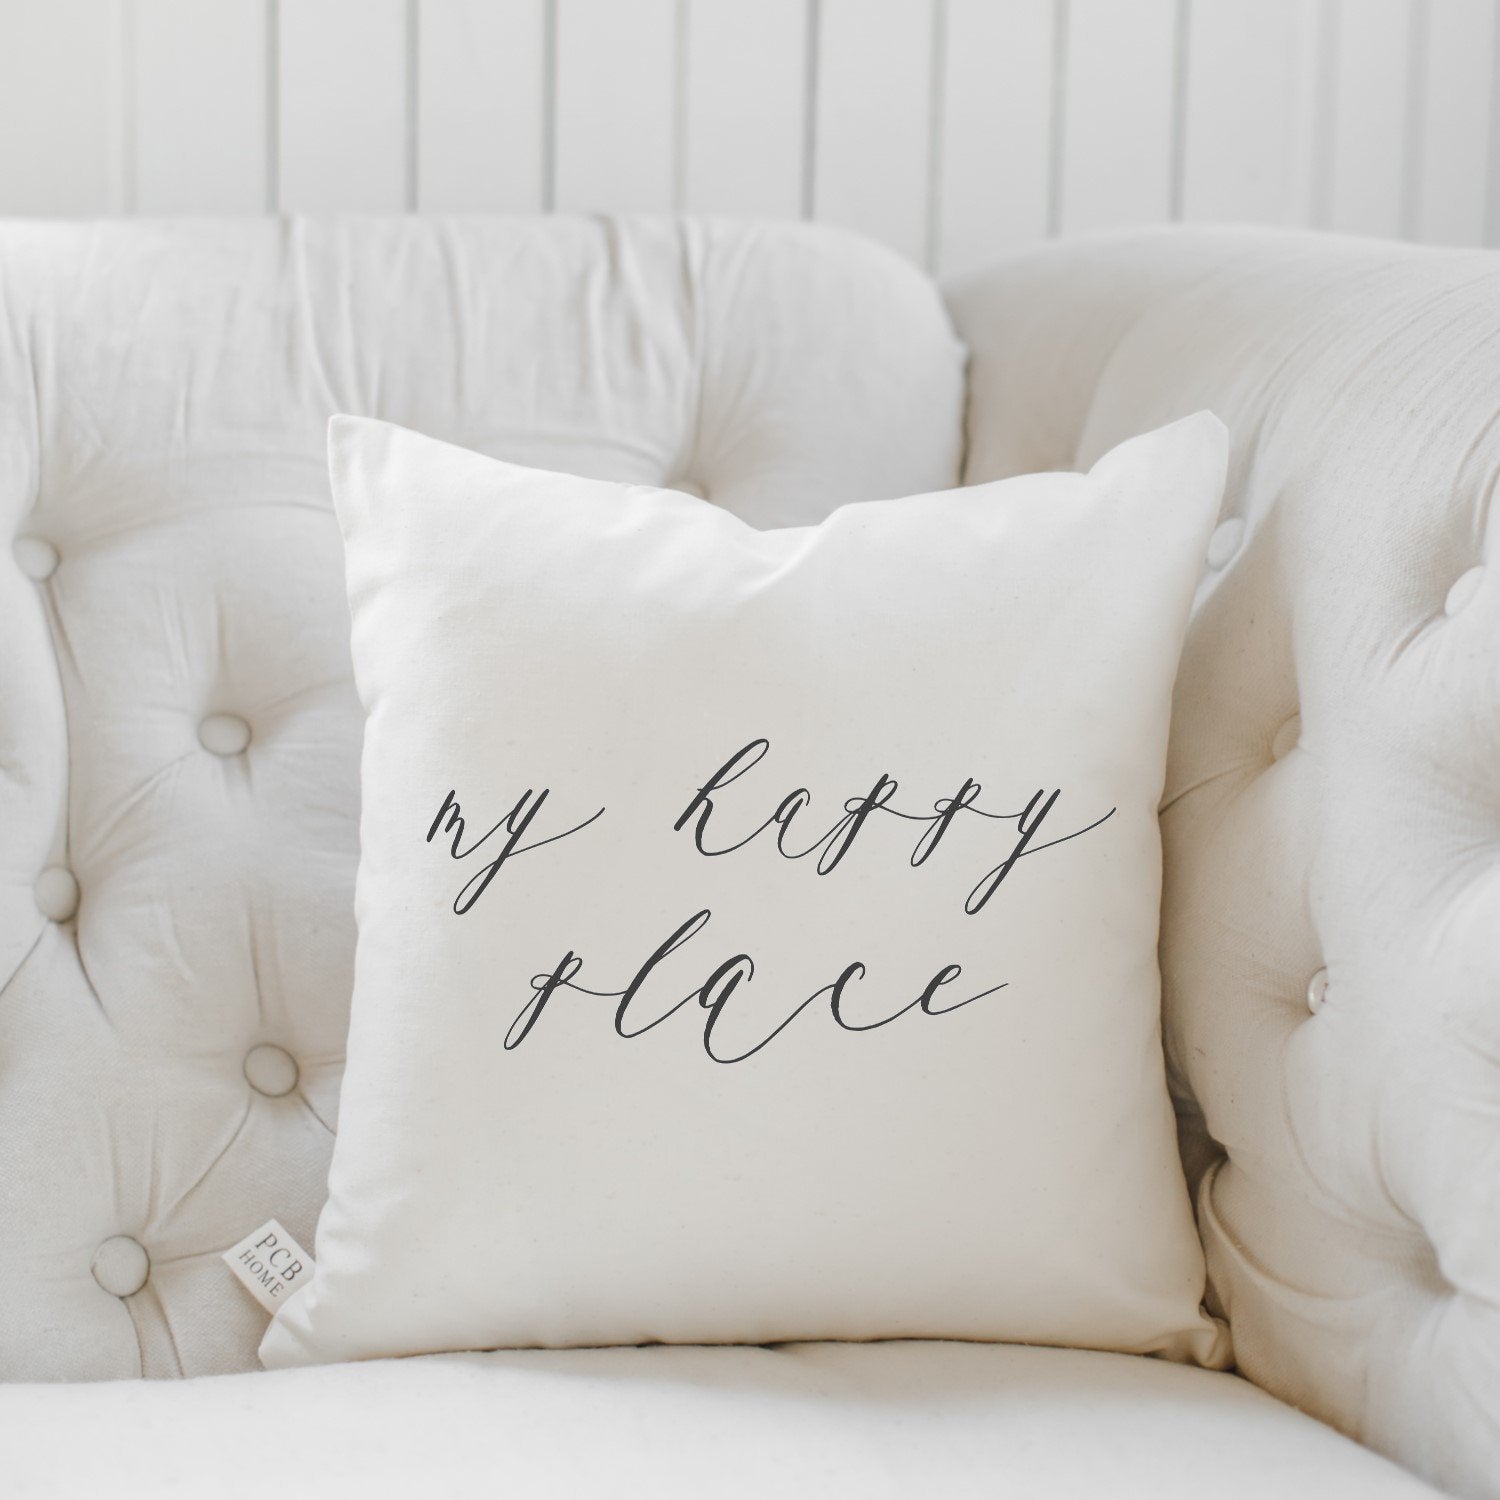 My Happy Place Pillow - Made in the USA